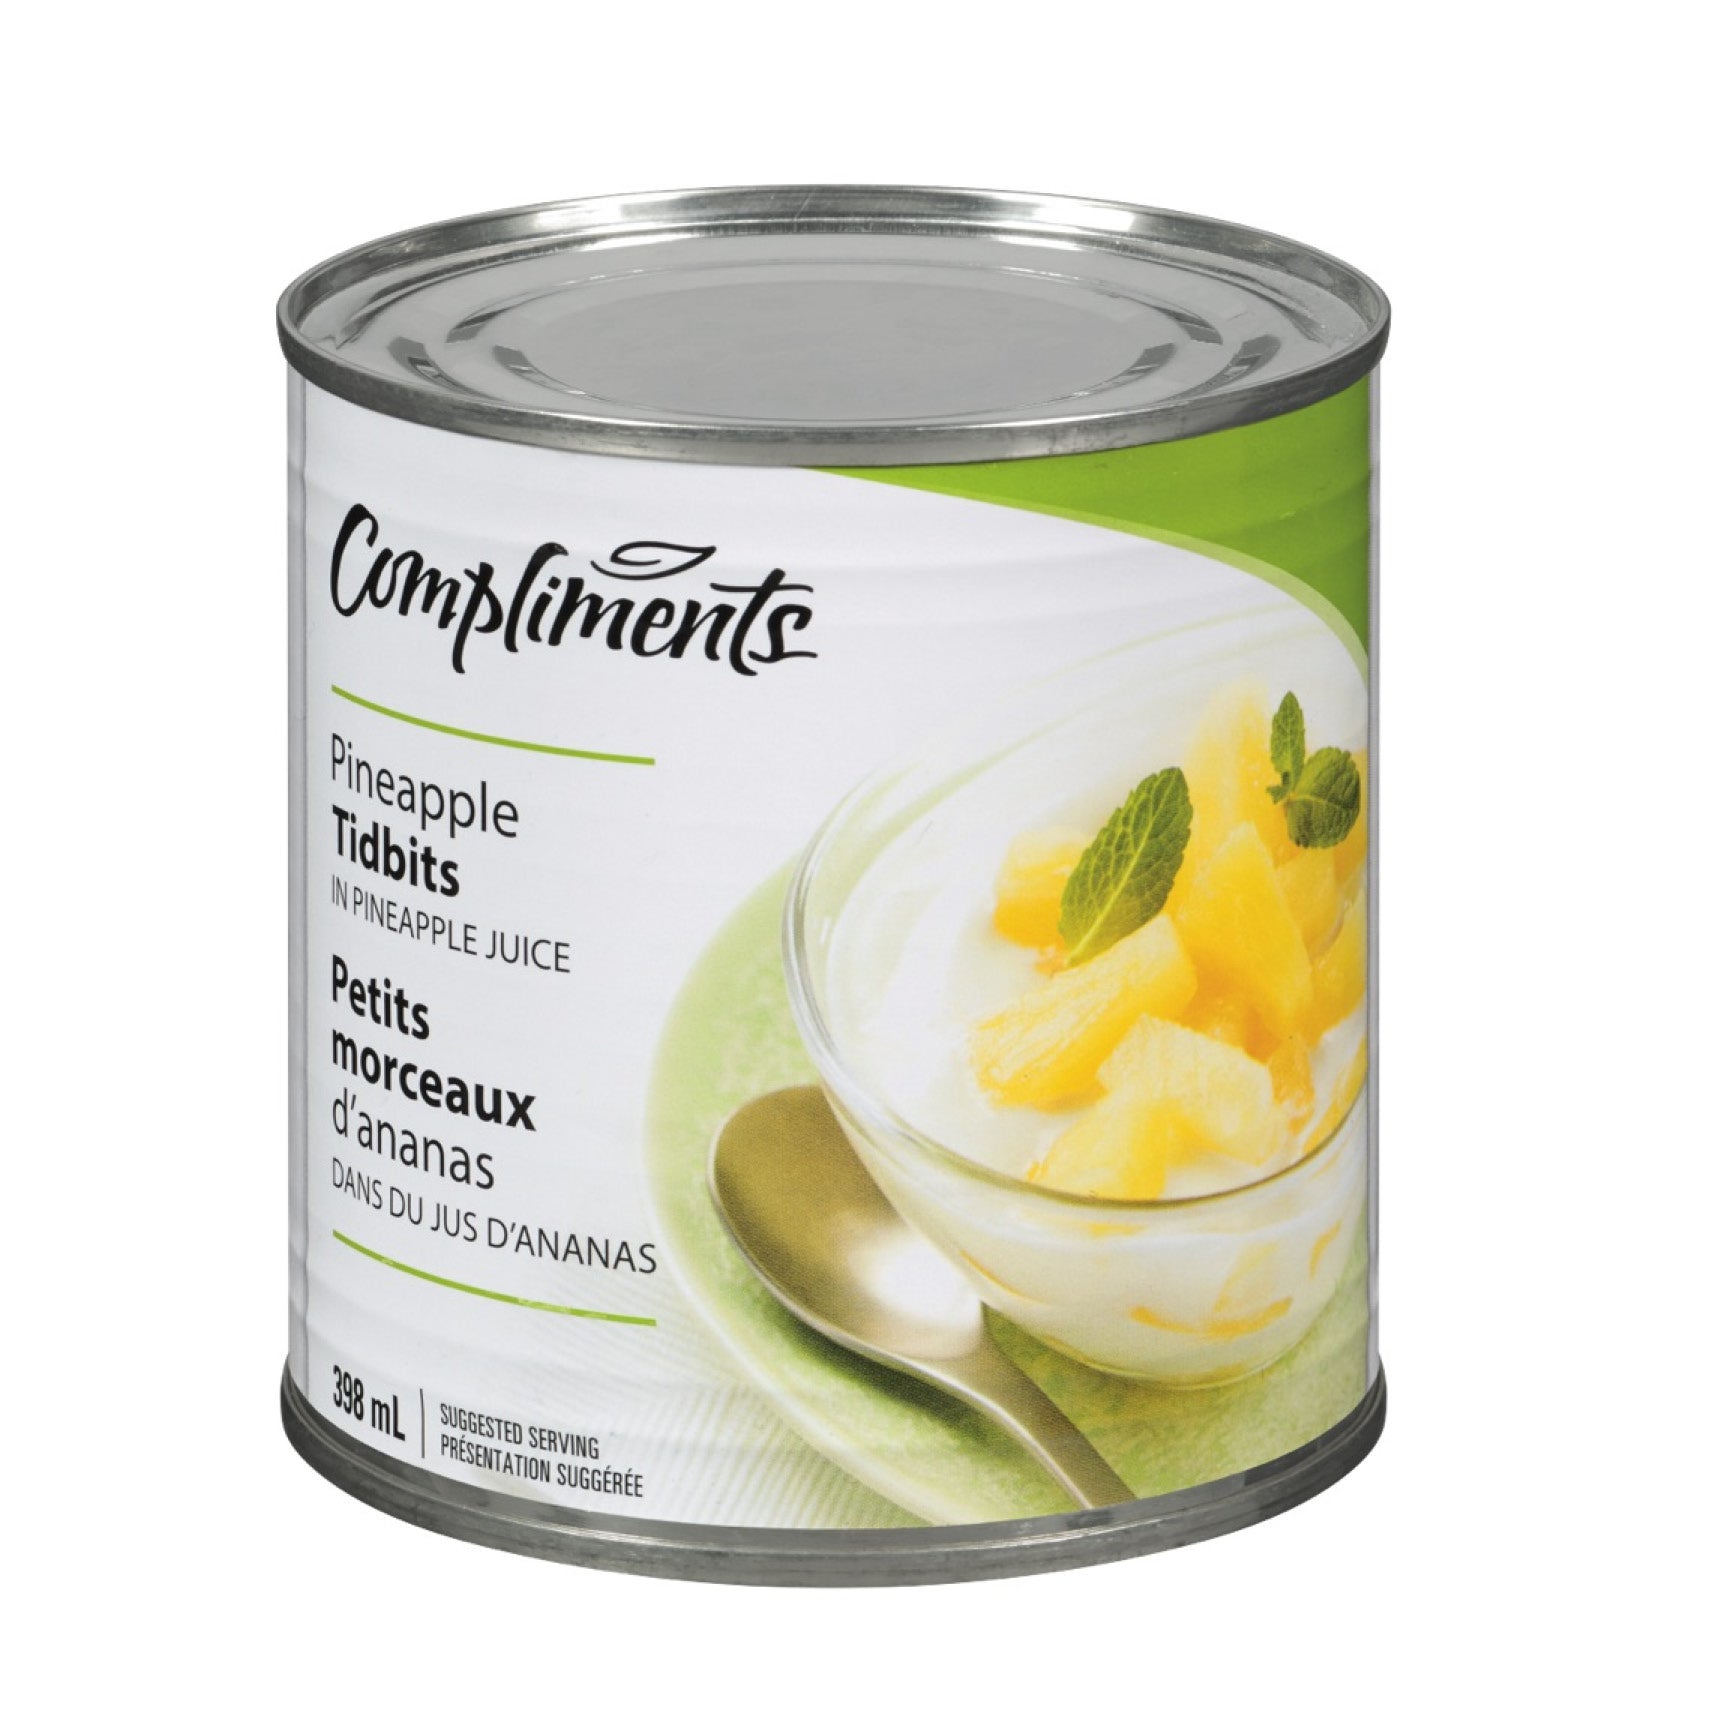 Compliments Pineapple Tidbits in Juice, 398ml